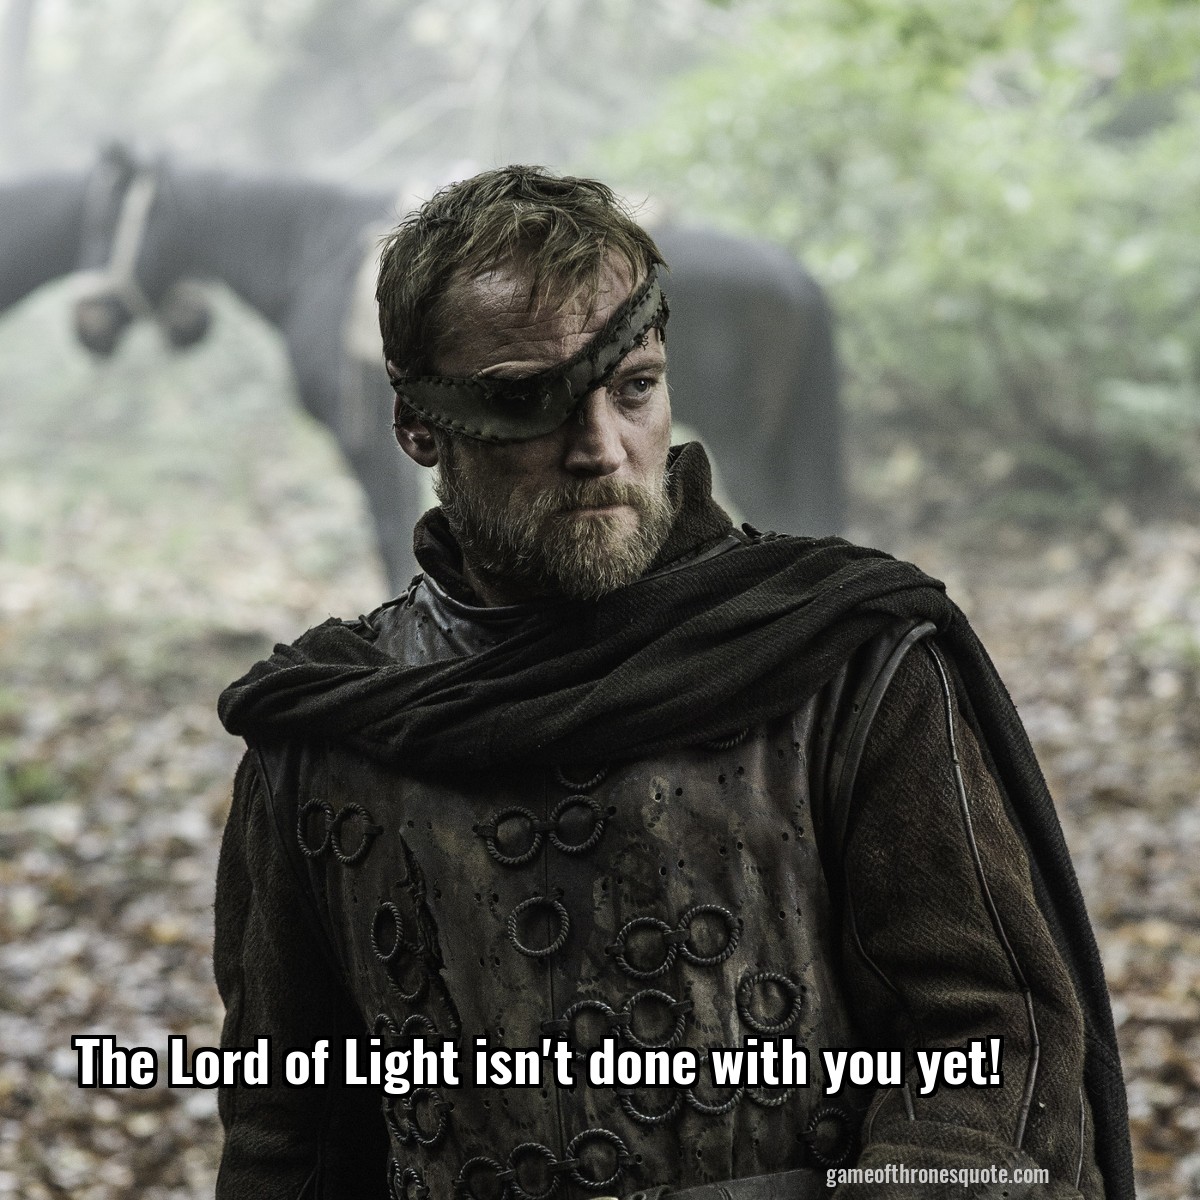 The Lord of Light isn't done with you yet!